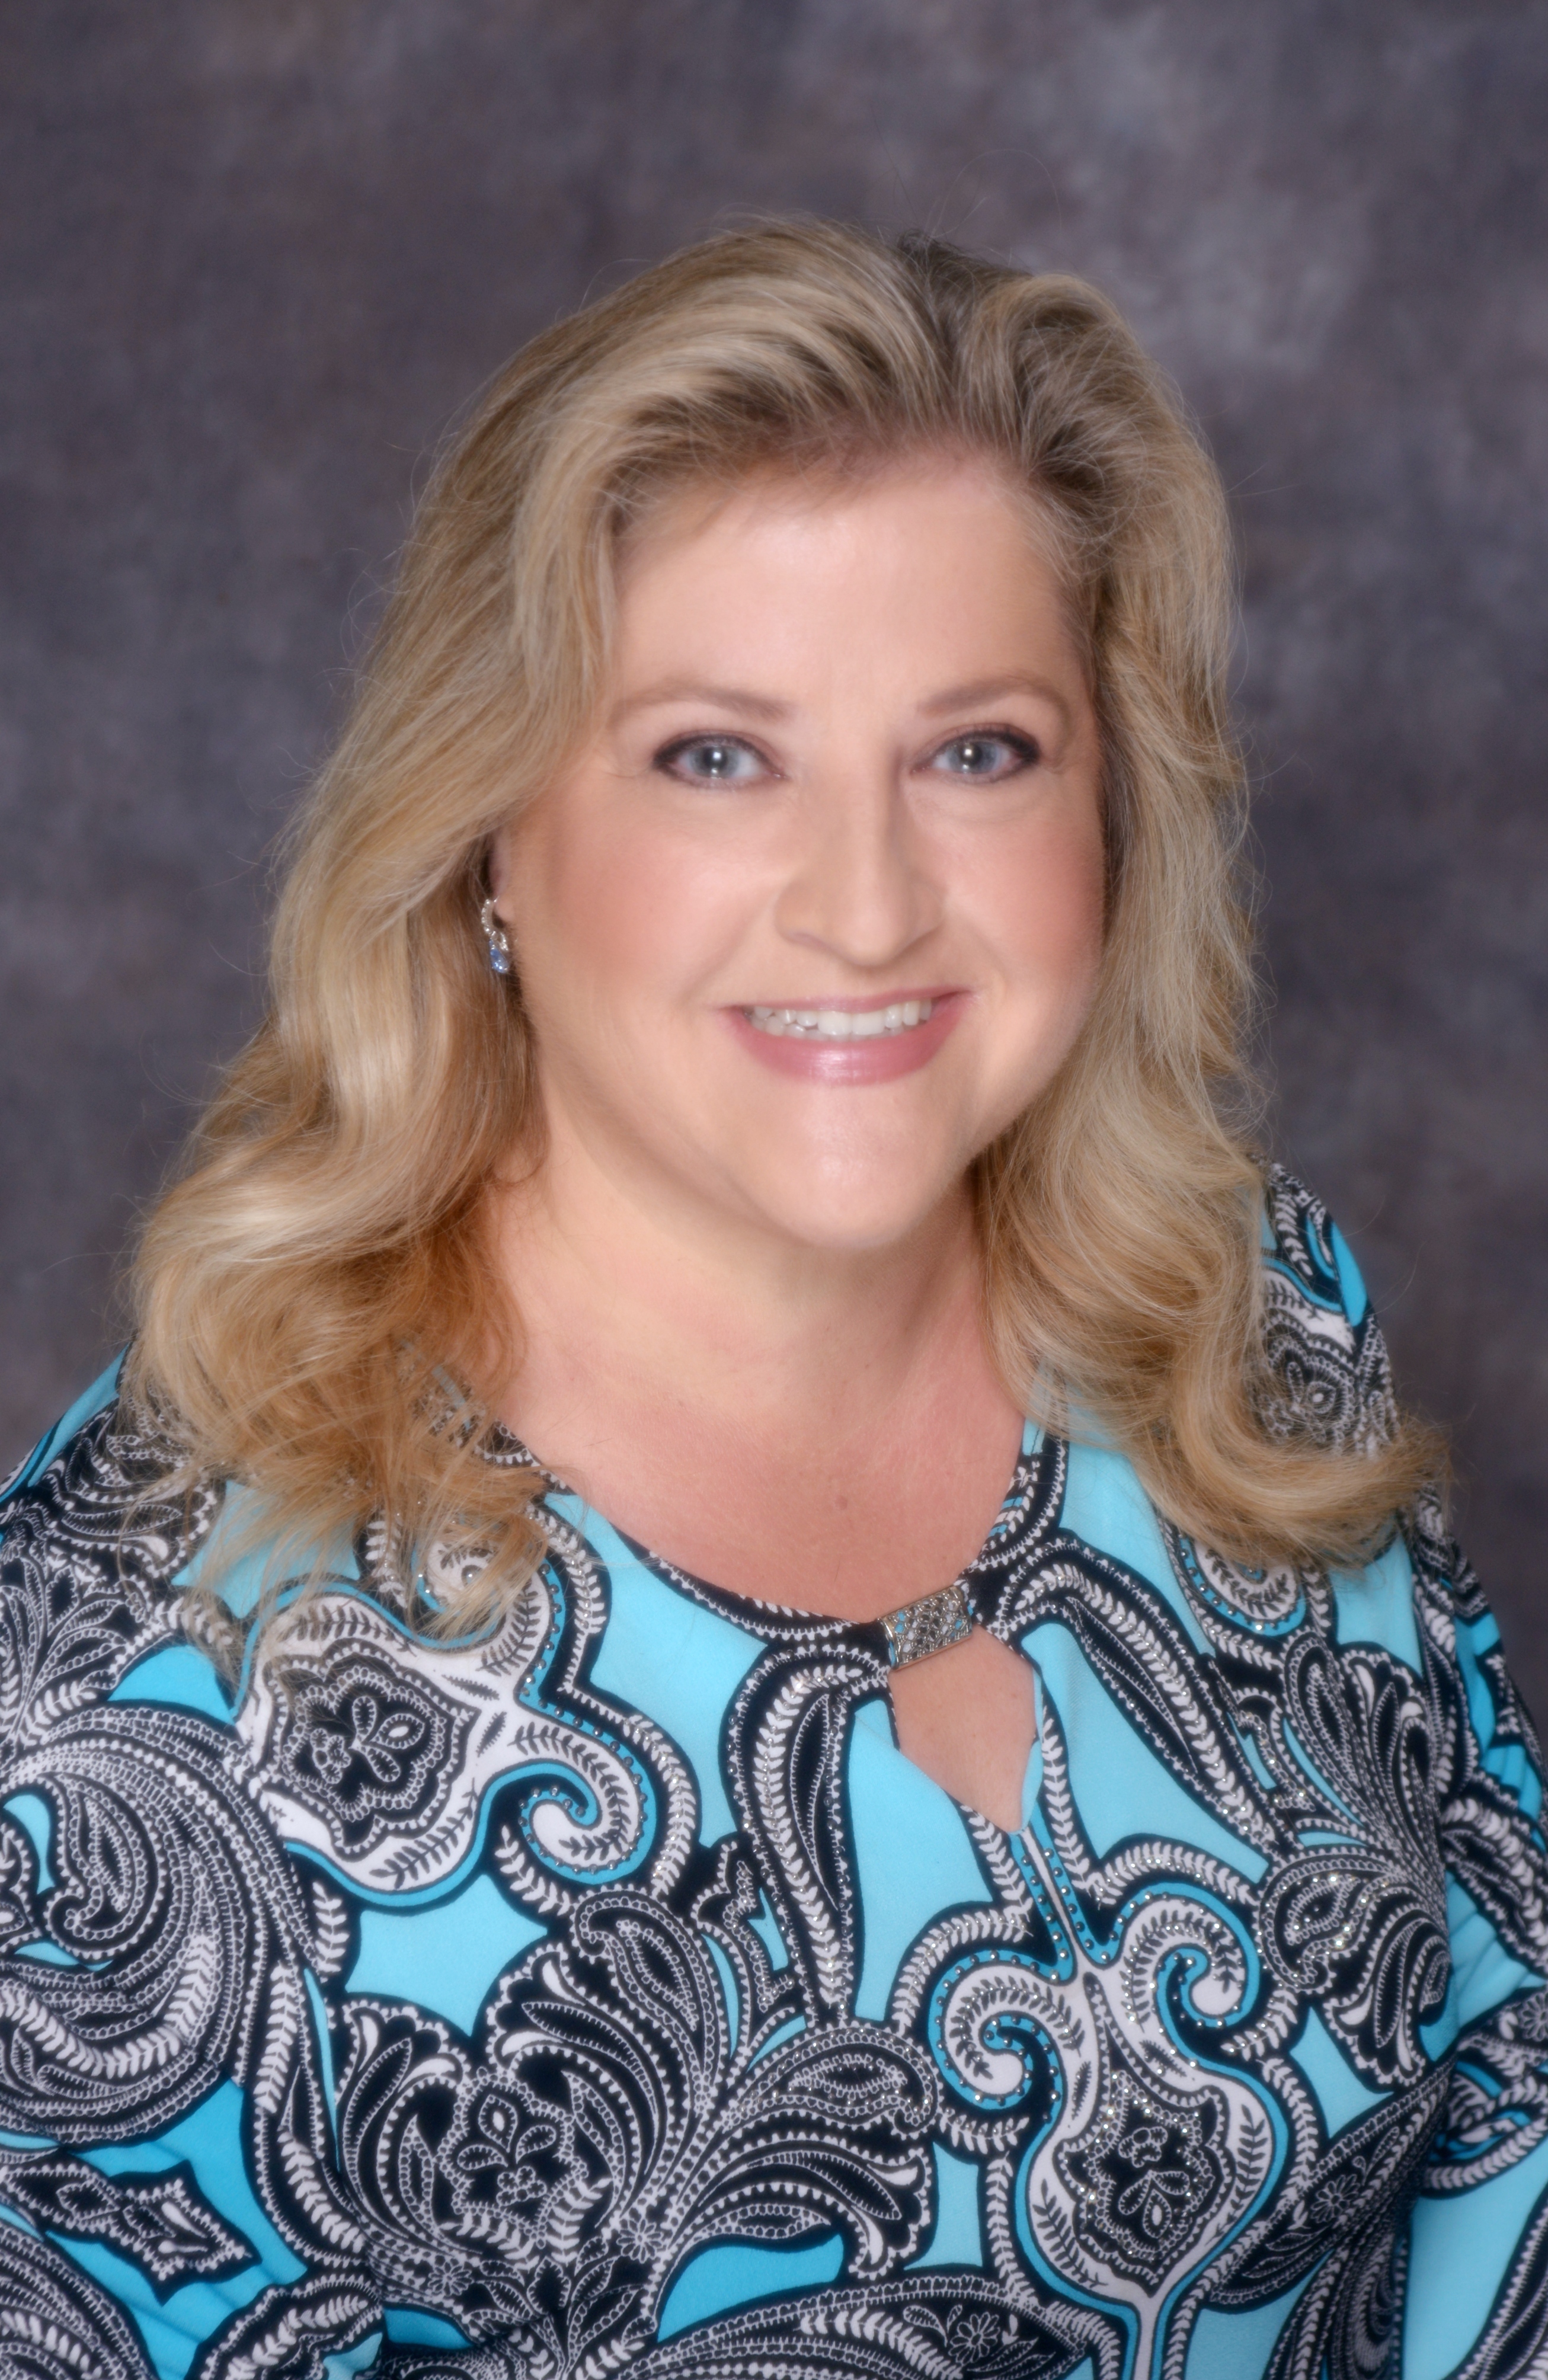 Dawn Cychner is Sales Manager and Mortgage Loan Originator at C&amp;S California Capital in Covina, Calif., and State Secretary of the California Association of Mortgage Professionals (CAMP)